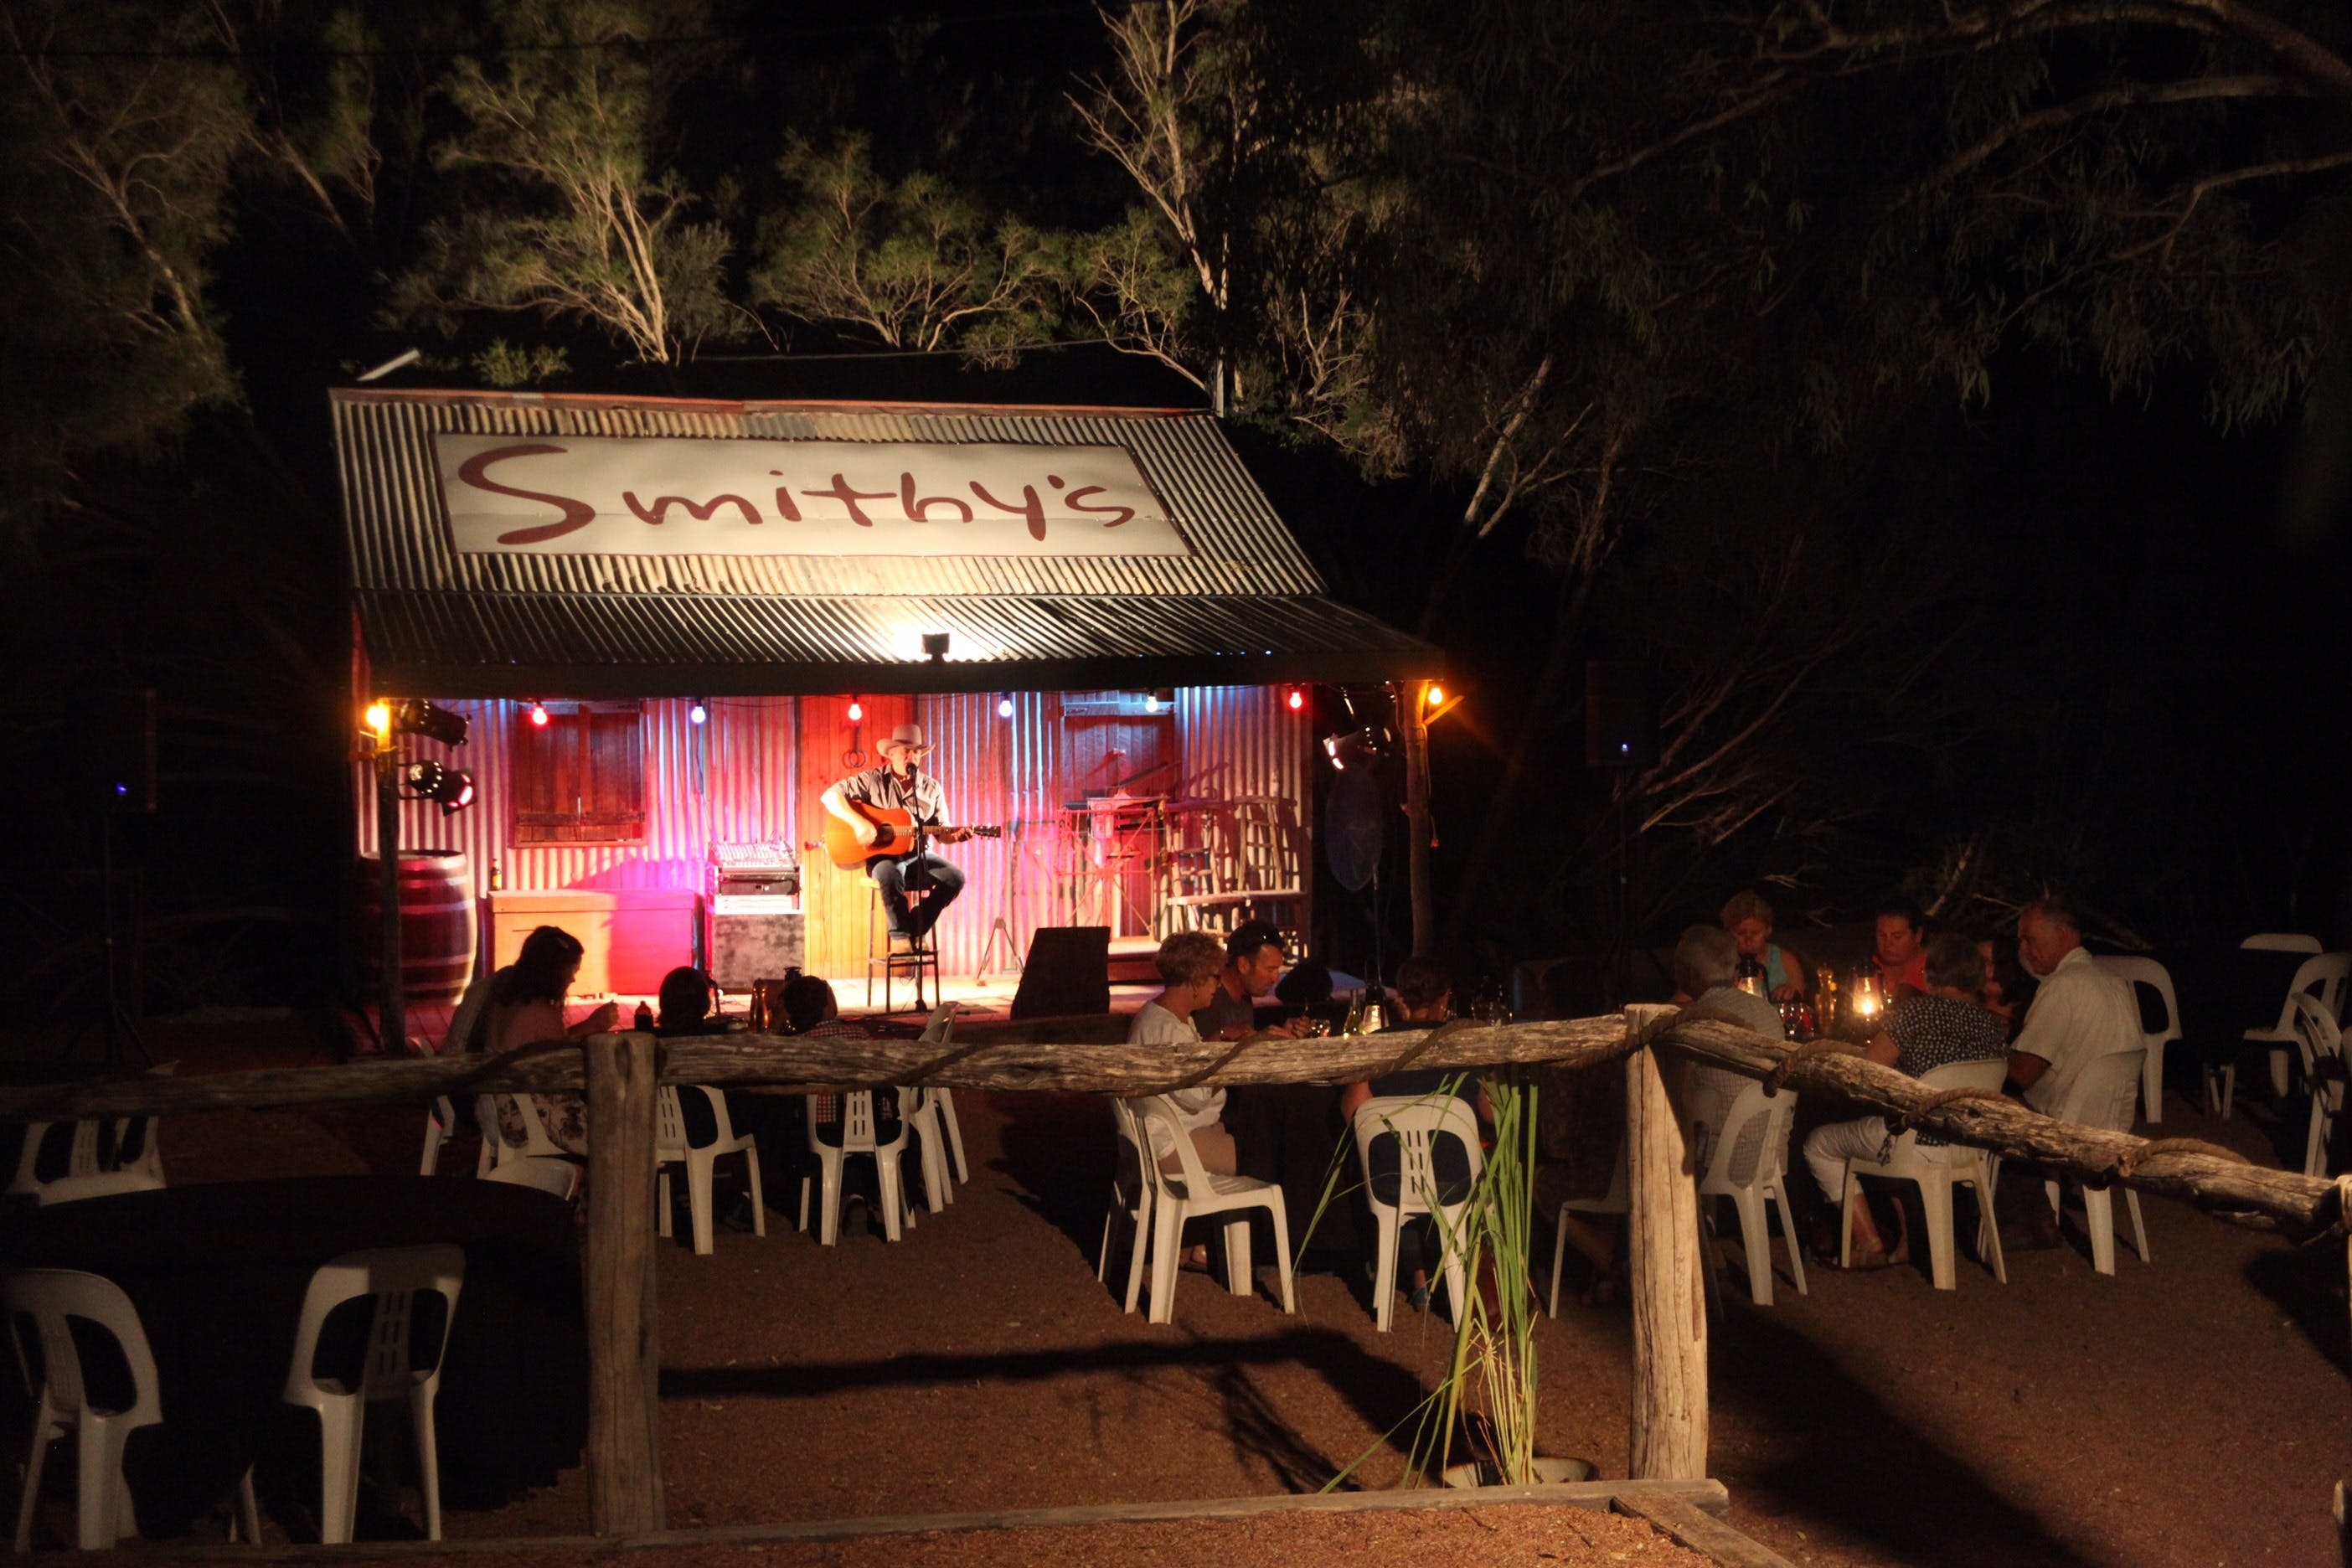 Smithy's Outback Dinner and Show - New South Wales Tourism 